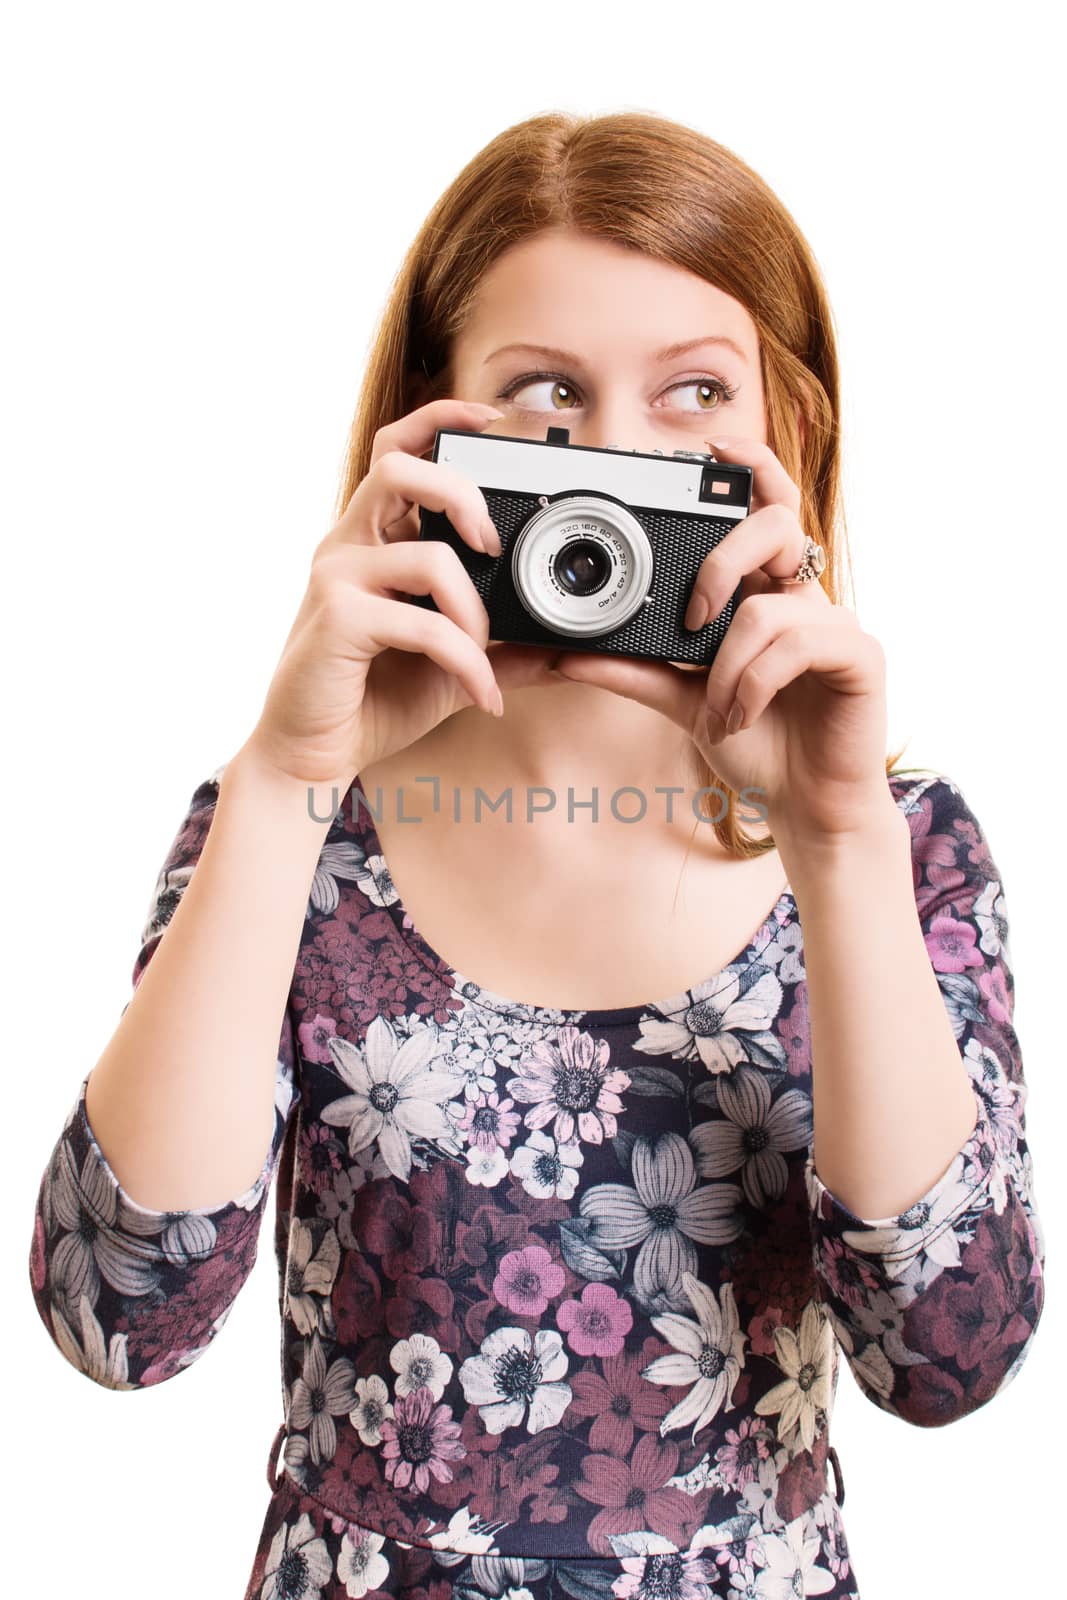 A portrait of a beautiful young girl holding a vintage camera, isolated on white background.